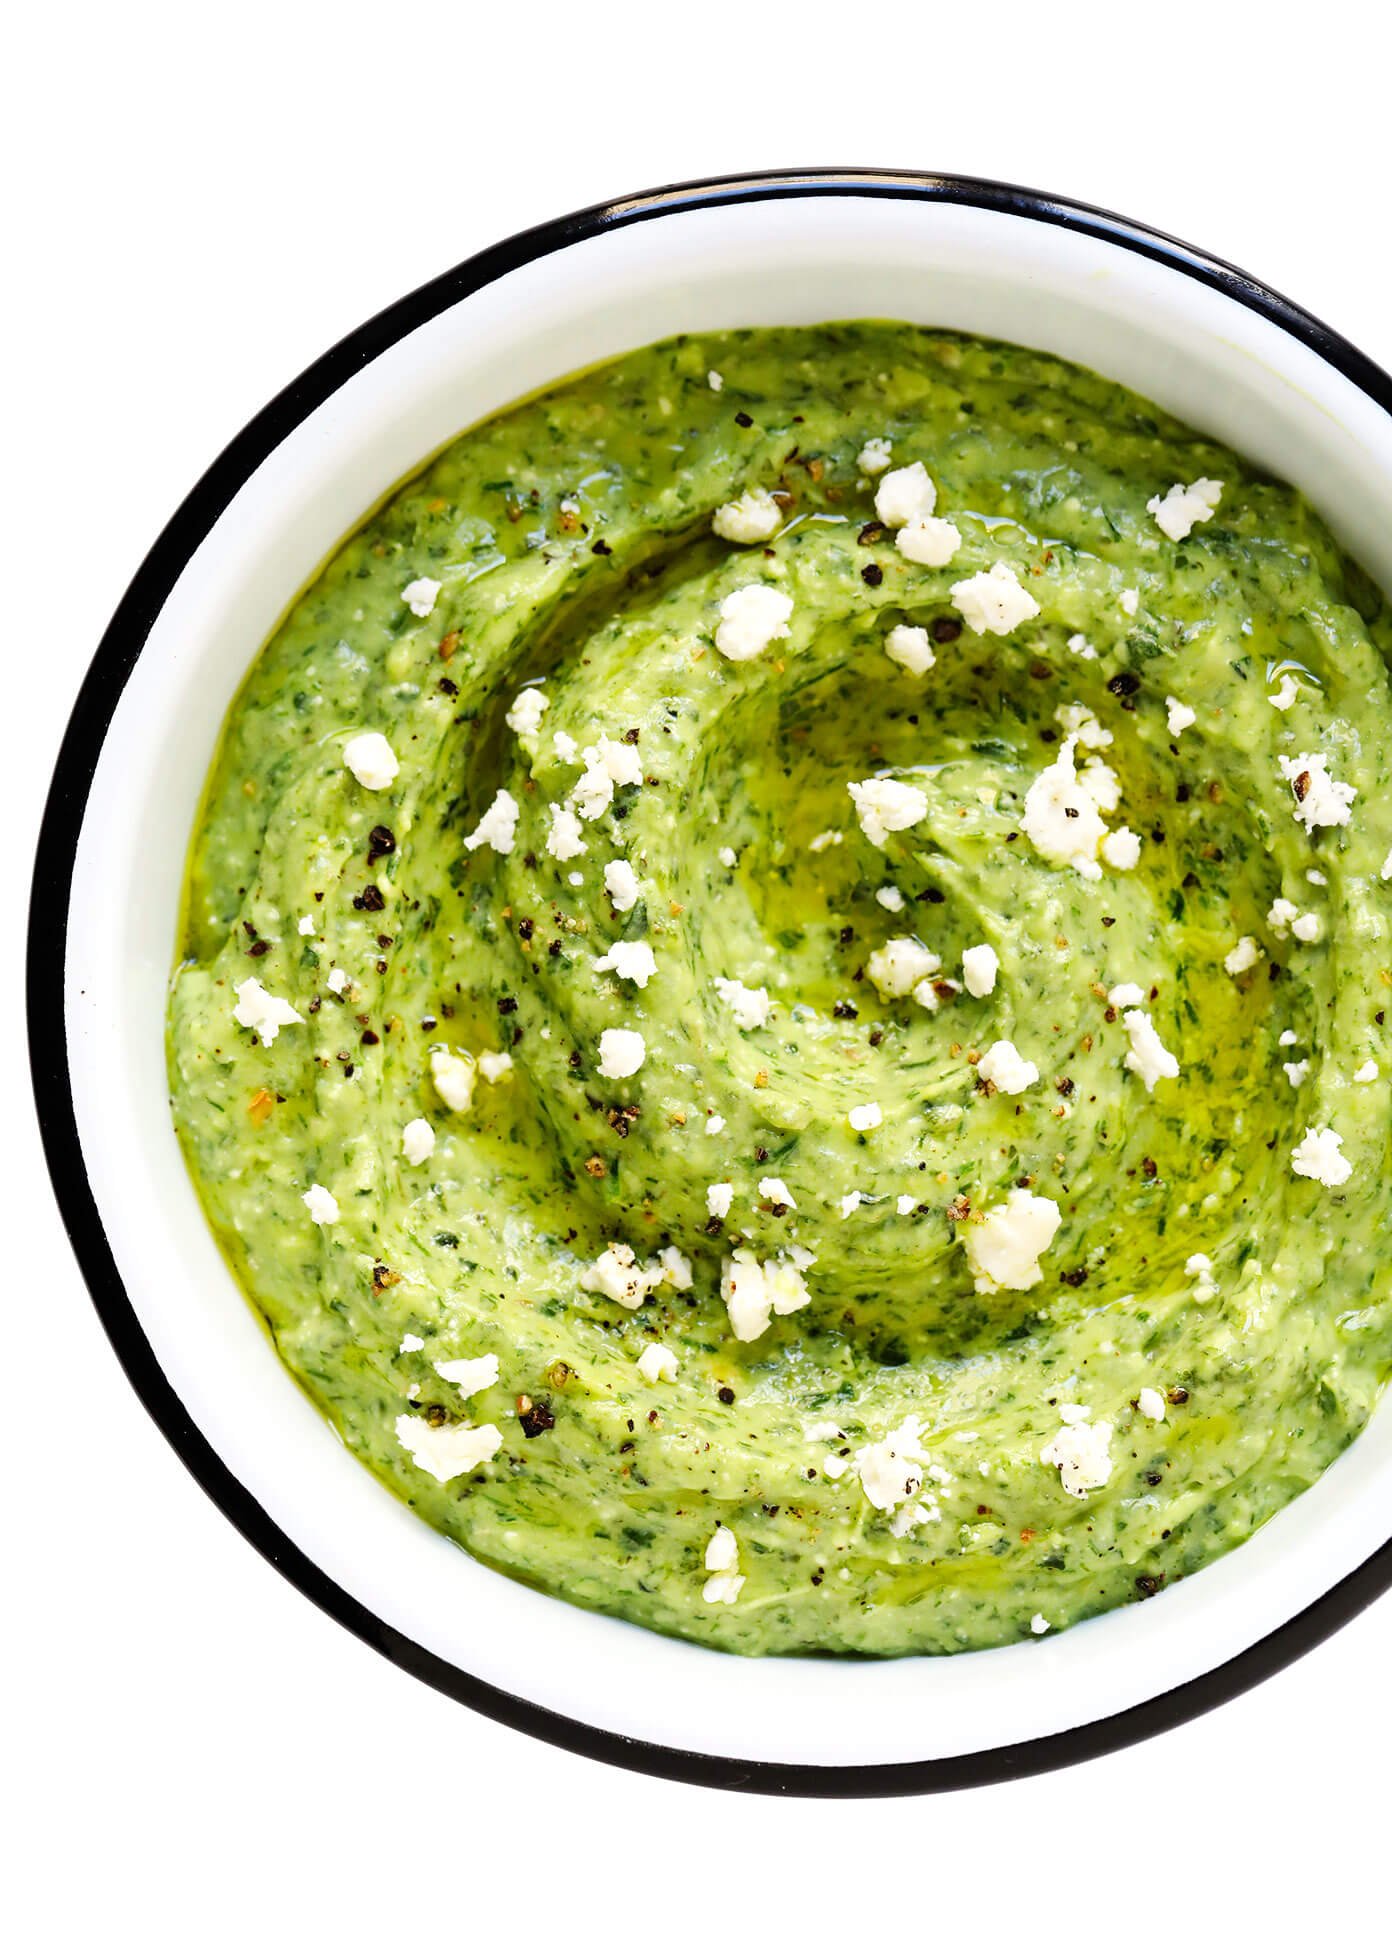 Green Goddess Dip with Crumbled Feta On Top